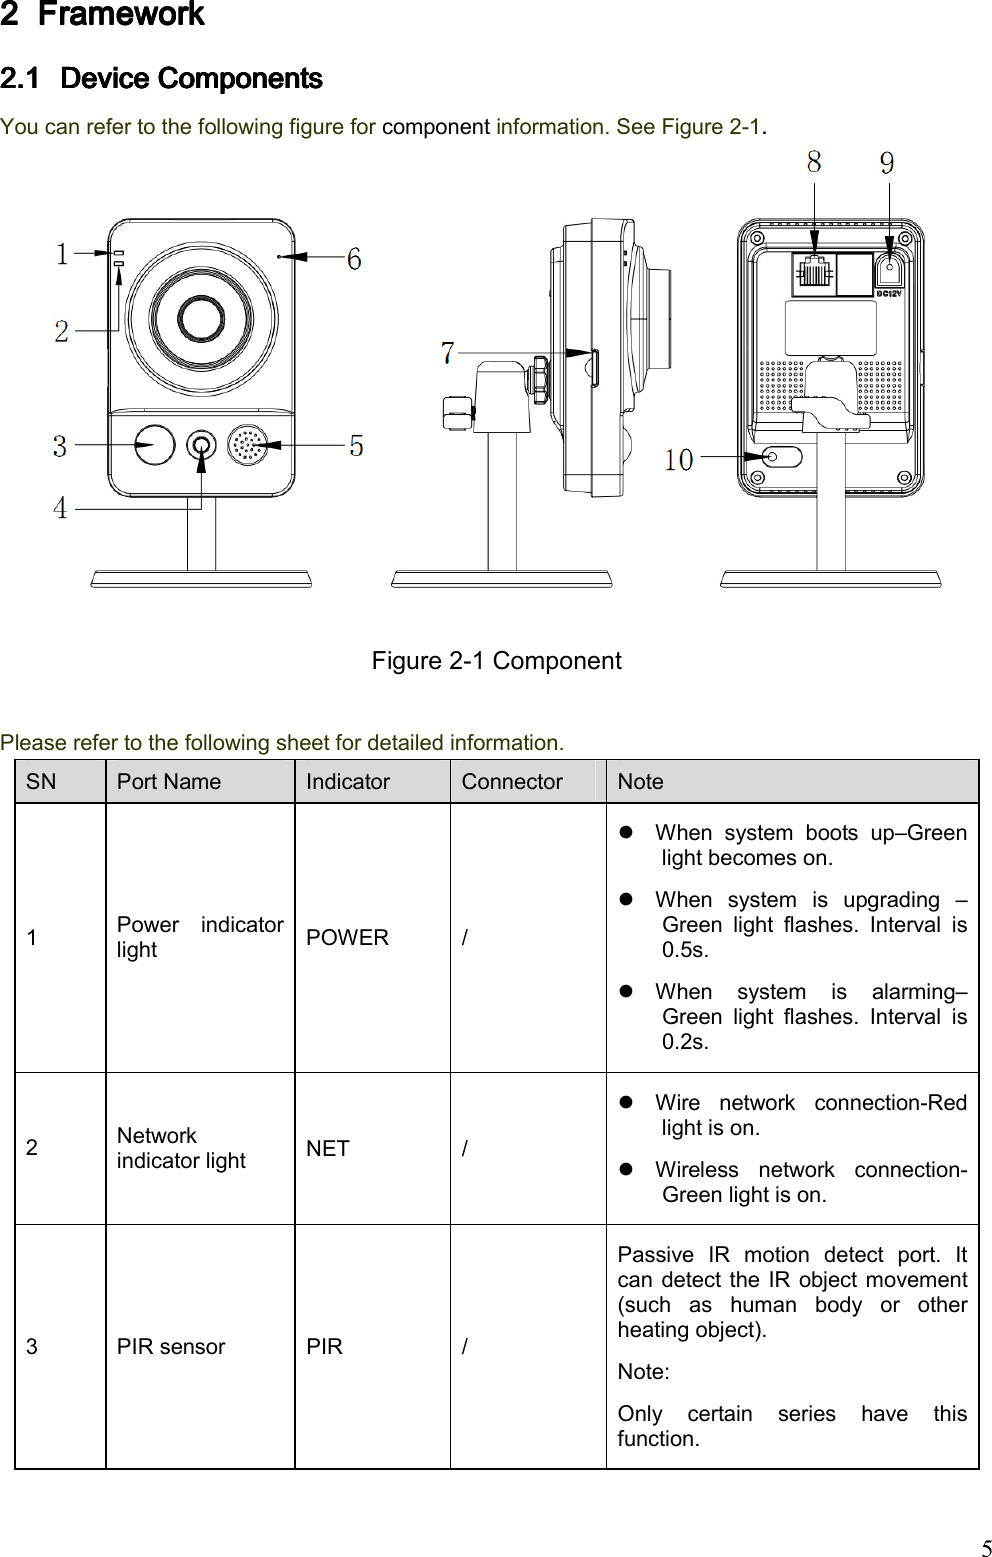                                                                               5 2222 FrameworkFrameworkFrameworkFramework    2.12.12.12.1 Device Components Device Components Device Components Device Components     You can refer to the following figure for component information. See Figure 2-1.   Figure 2-1 Component   Please refer to the following sheet for detailed information. SN  Port Name   Indicator   Connector  Note 1    Power  indicator light   POWER  /   When  system  boots  up–Green light becomes on.    When  system  is  upgrading  – Green  light  flashes.  Interval  is 0.5s.   When  system  is  alarming–Green  light  flashes.  Interval  is 0.2s.  2    Network indicator light   NET  /   Wire  network  connection-Red light is on.    Wireless  network  connection-Green light is on.  3    PIR sensor   PIR  / Passive  IR  motion  detect  port.  It can detect the IR object movement (such  as  human  body  or  other heating object). Note:  Only  certain  series  have  this function.  